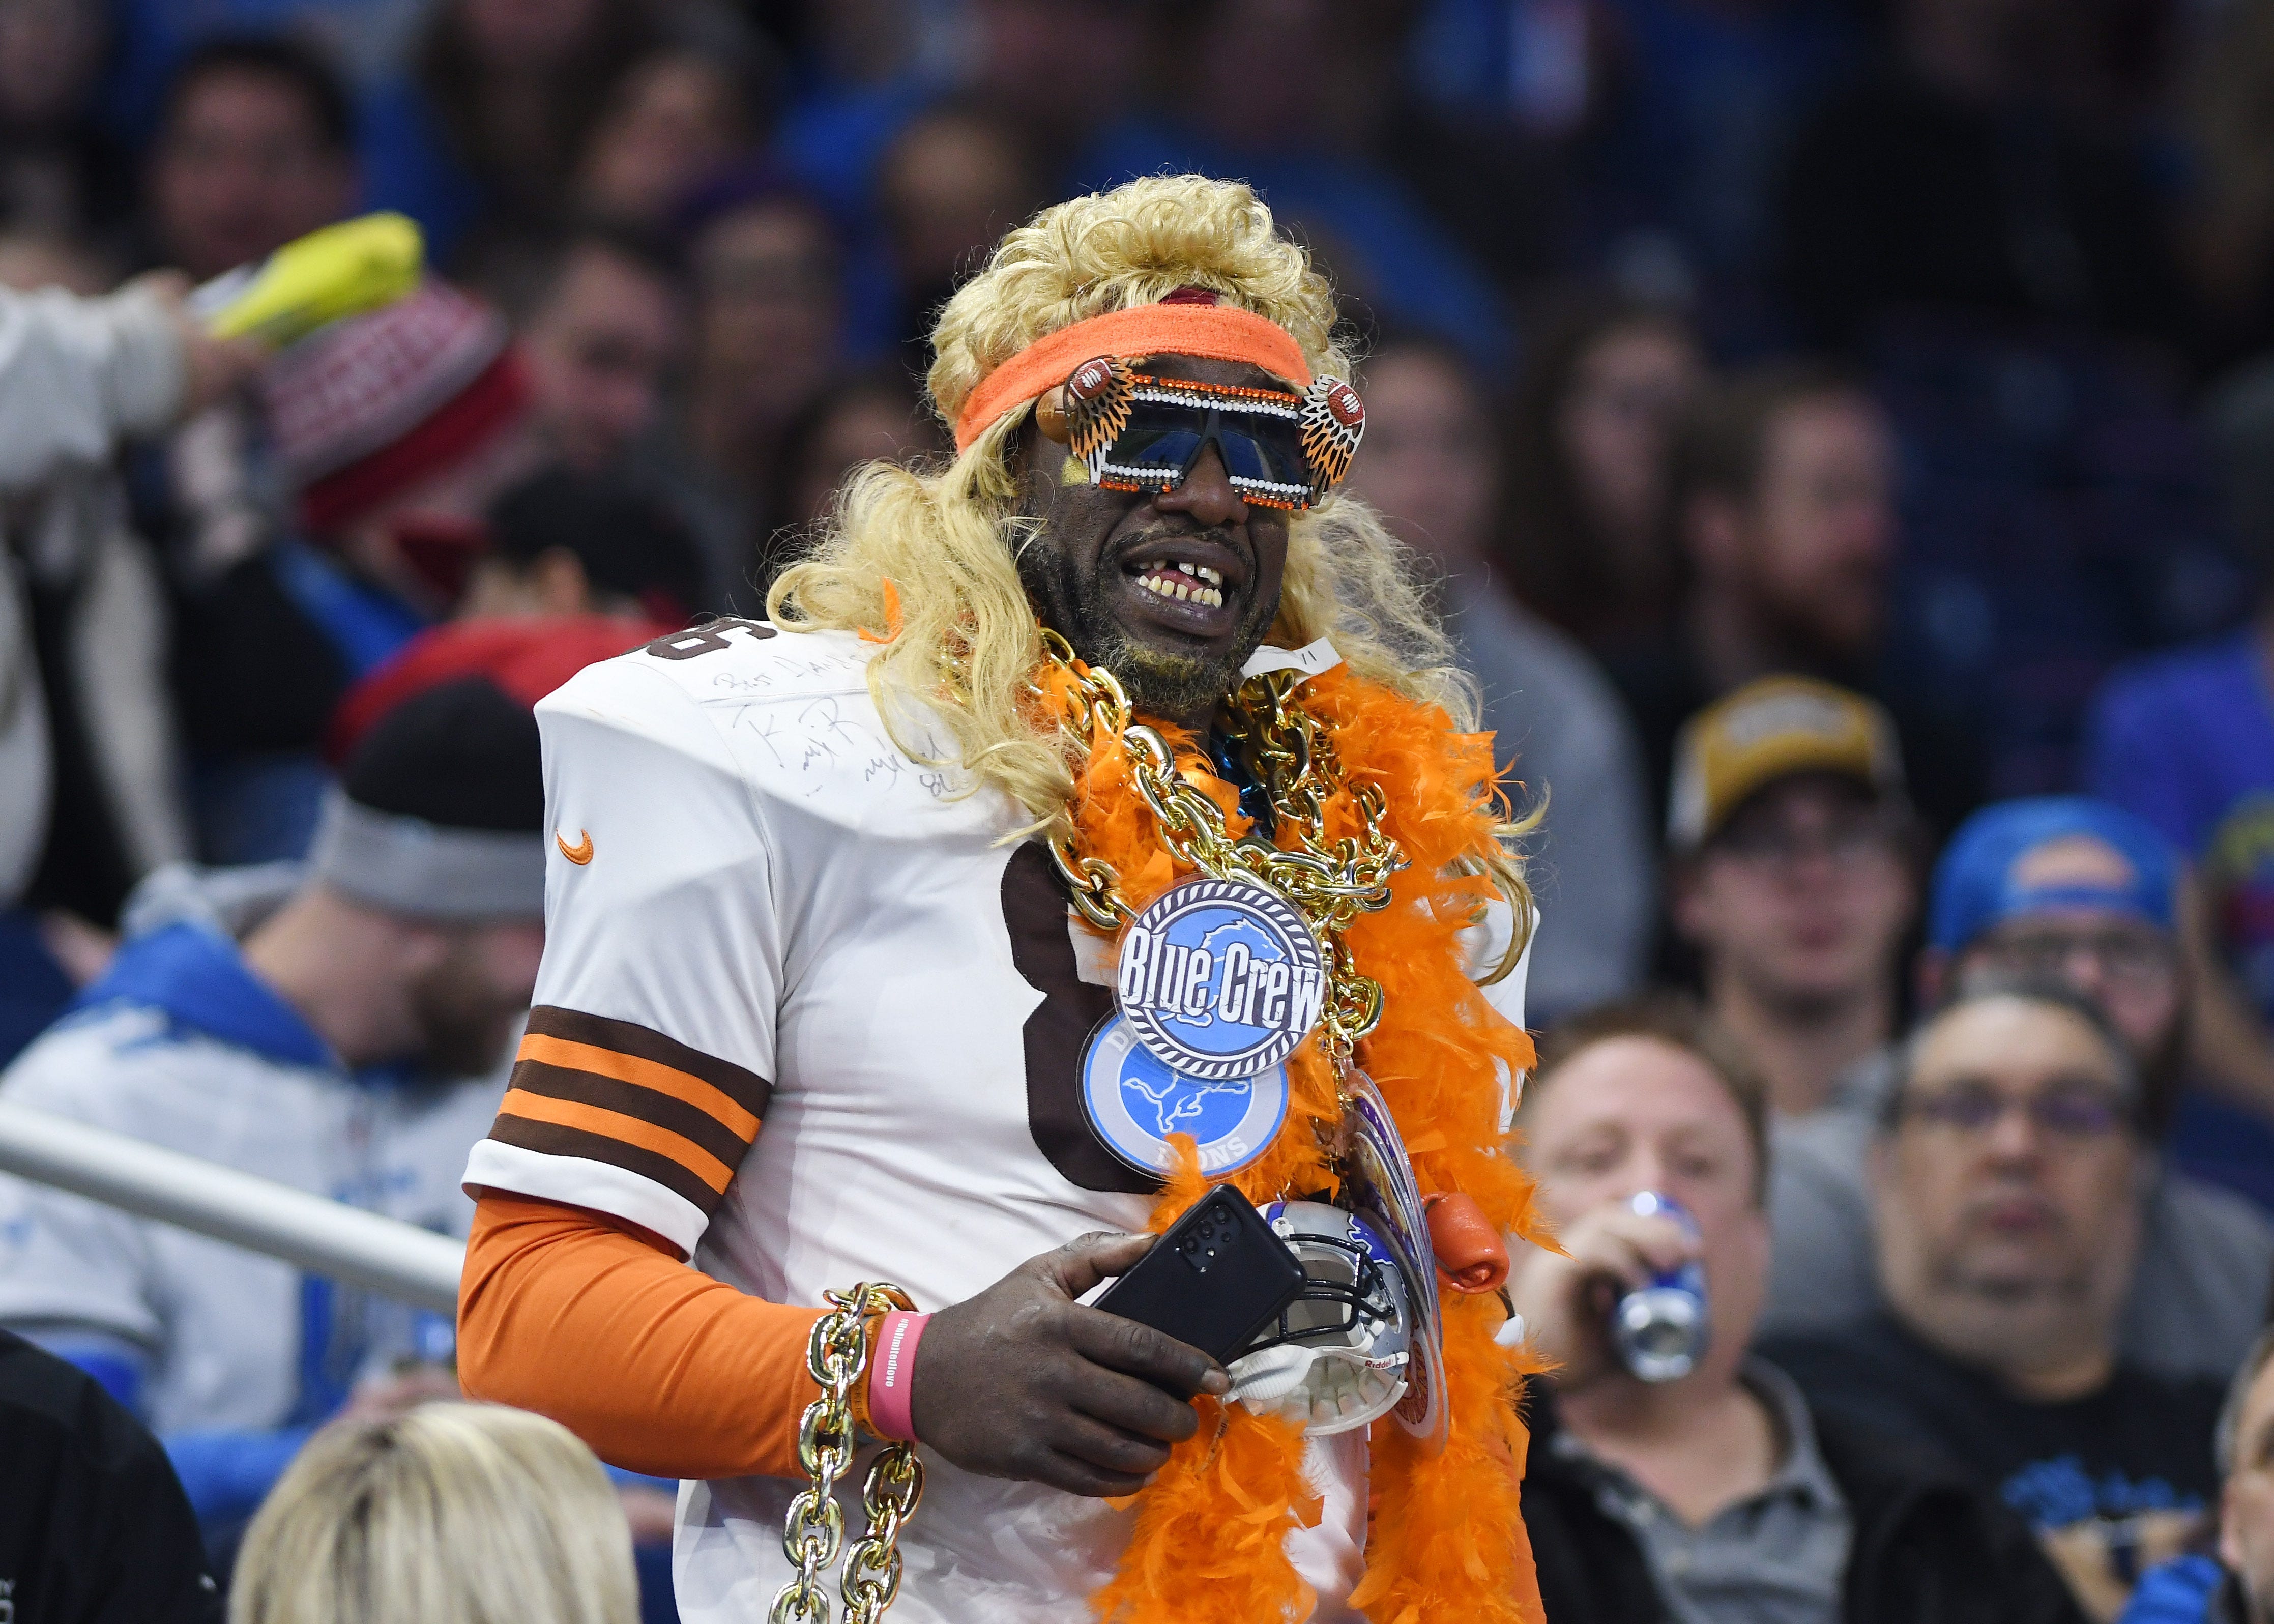 A confused Browns fan in the stands at the Detroi Lions, Minnesota Vikings game in Detroit.